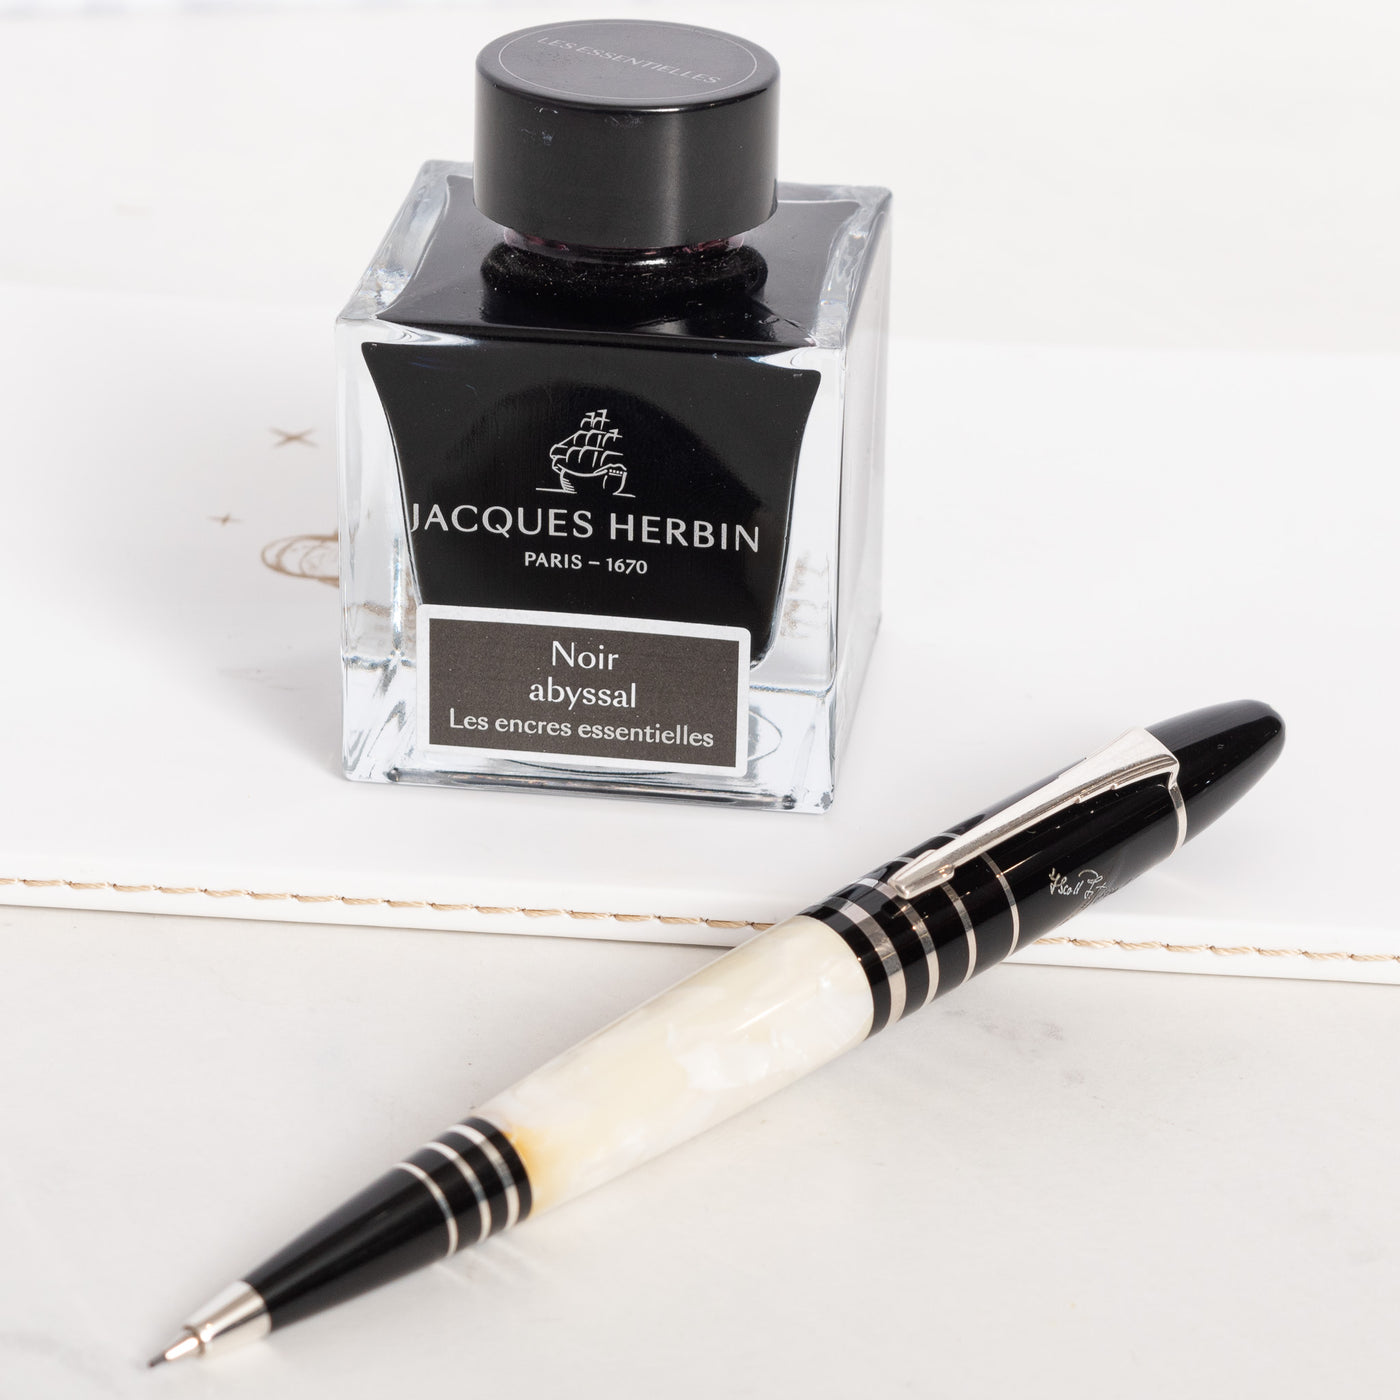 Montblanc Writer's Edition F Scott Fitzgerald Mechanical Pencil limited edition